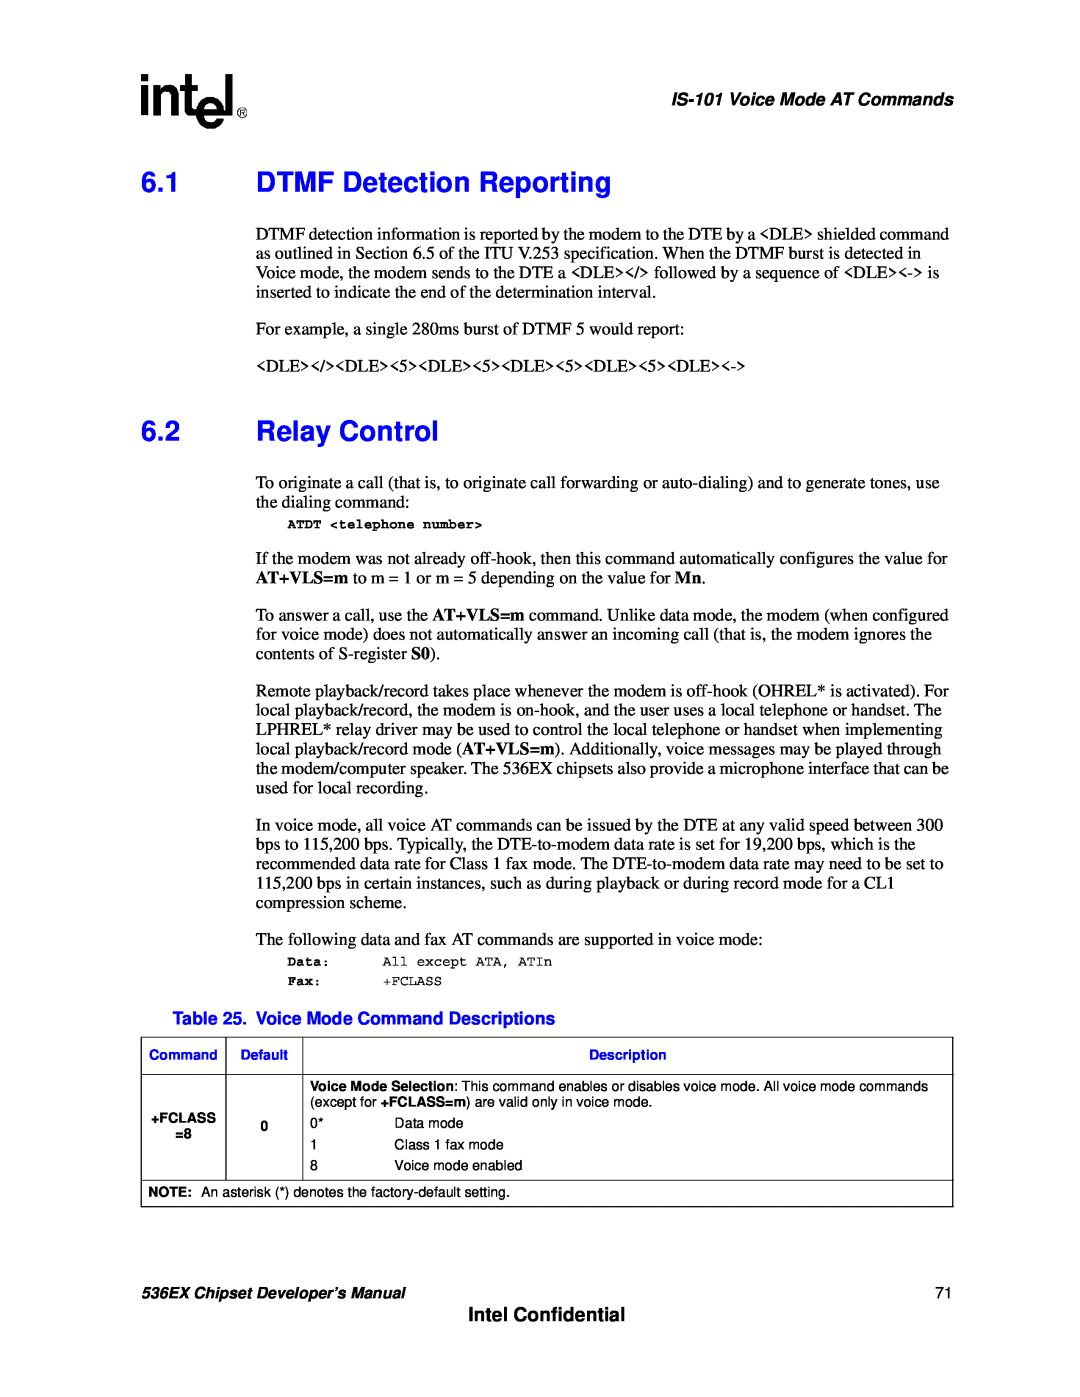 Intel 537EX manual 6.1DTMF Detection Reporting, 6.2Relay Control, Intel Confidential, IS-101Voice Mode AT Commands 